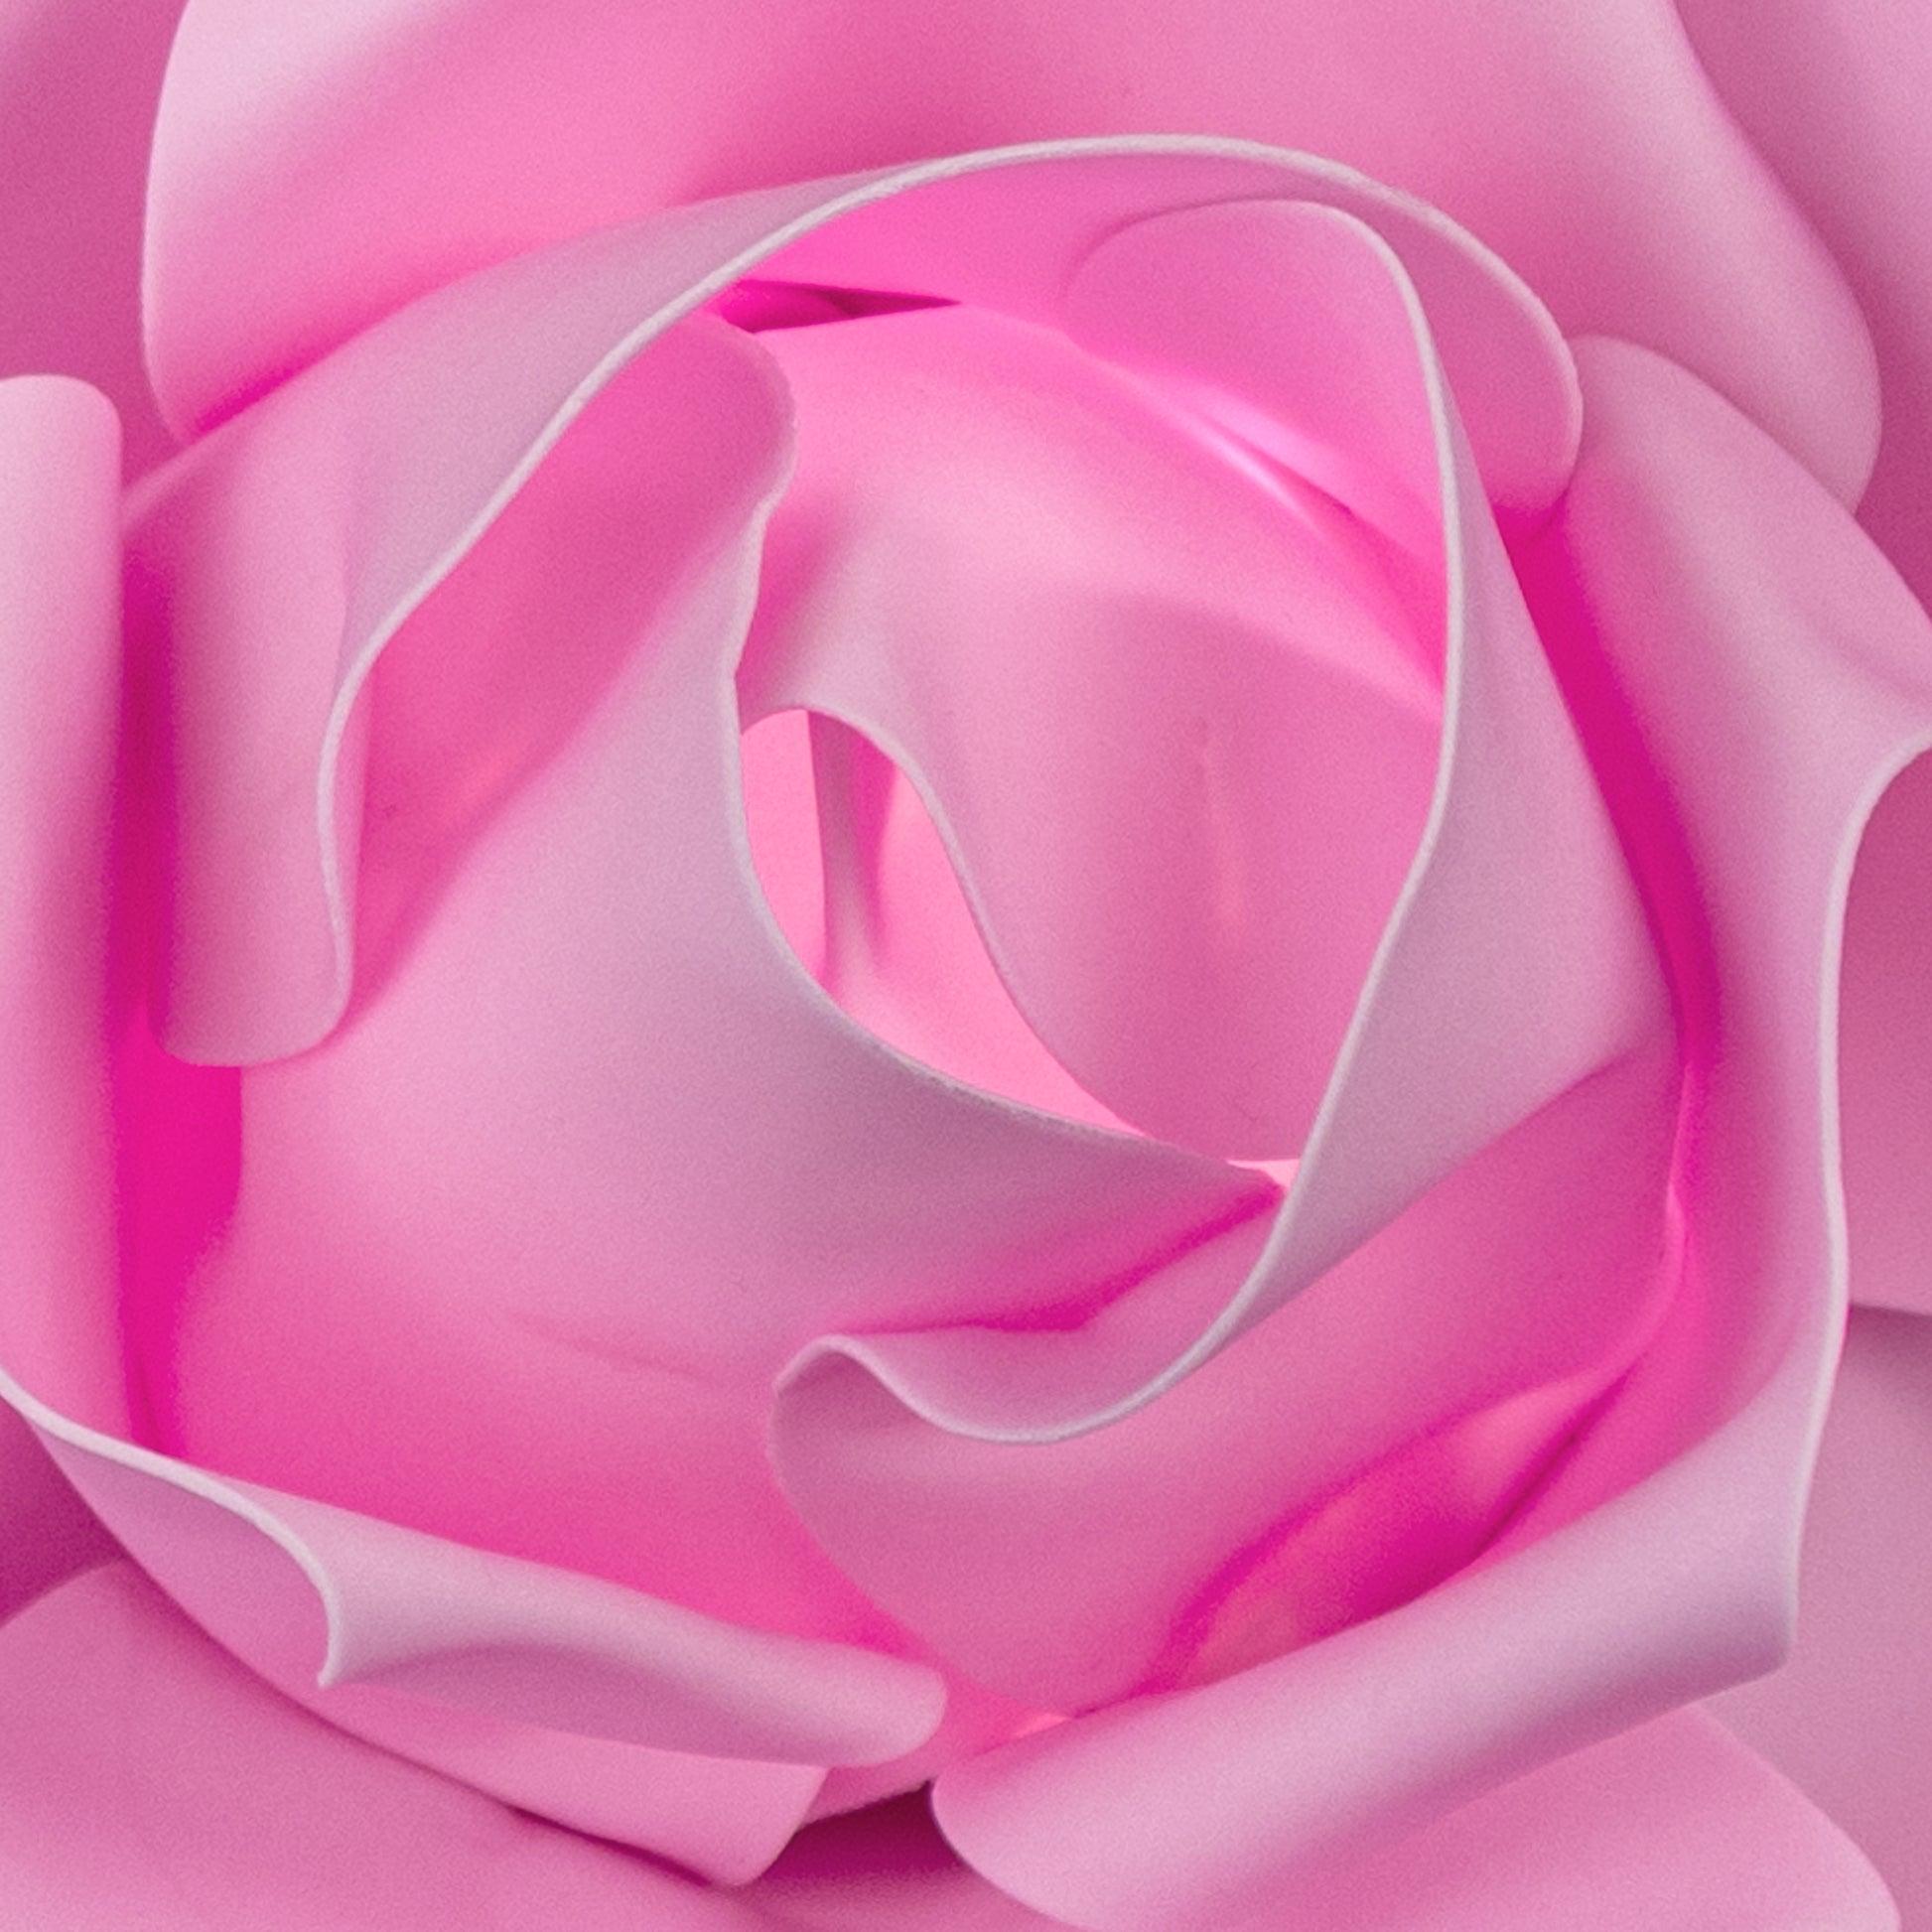 Lighted Large Foam Rose Wall Decor 50 cm - Pink